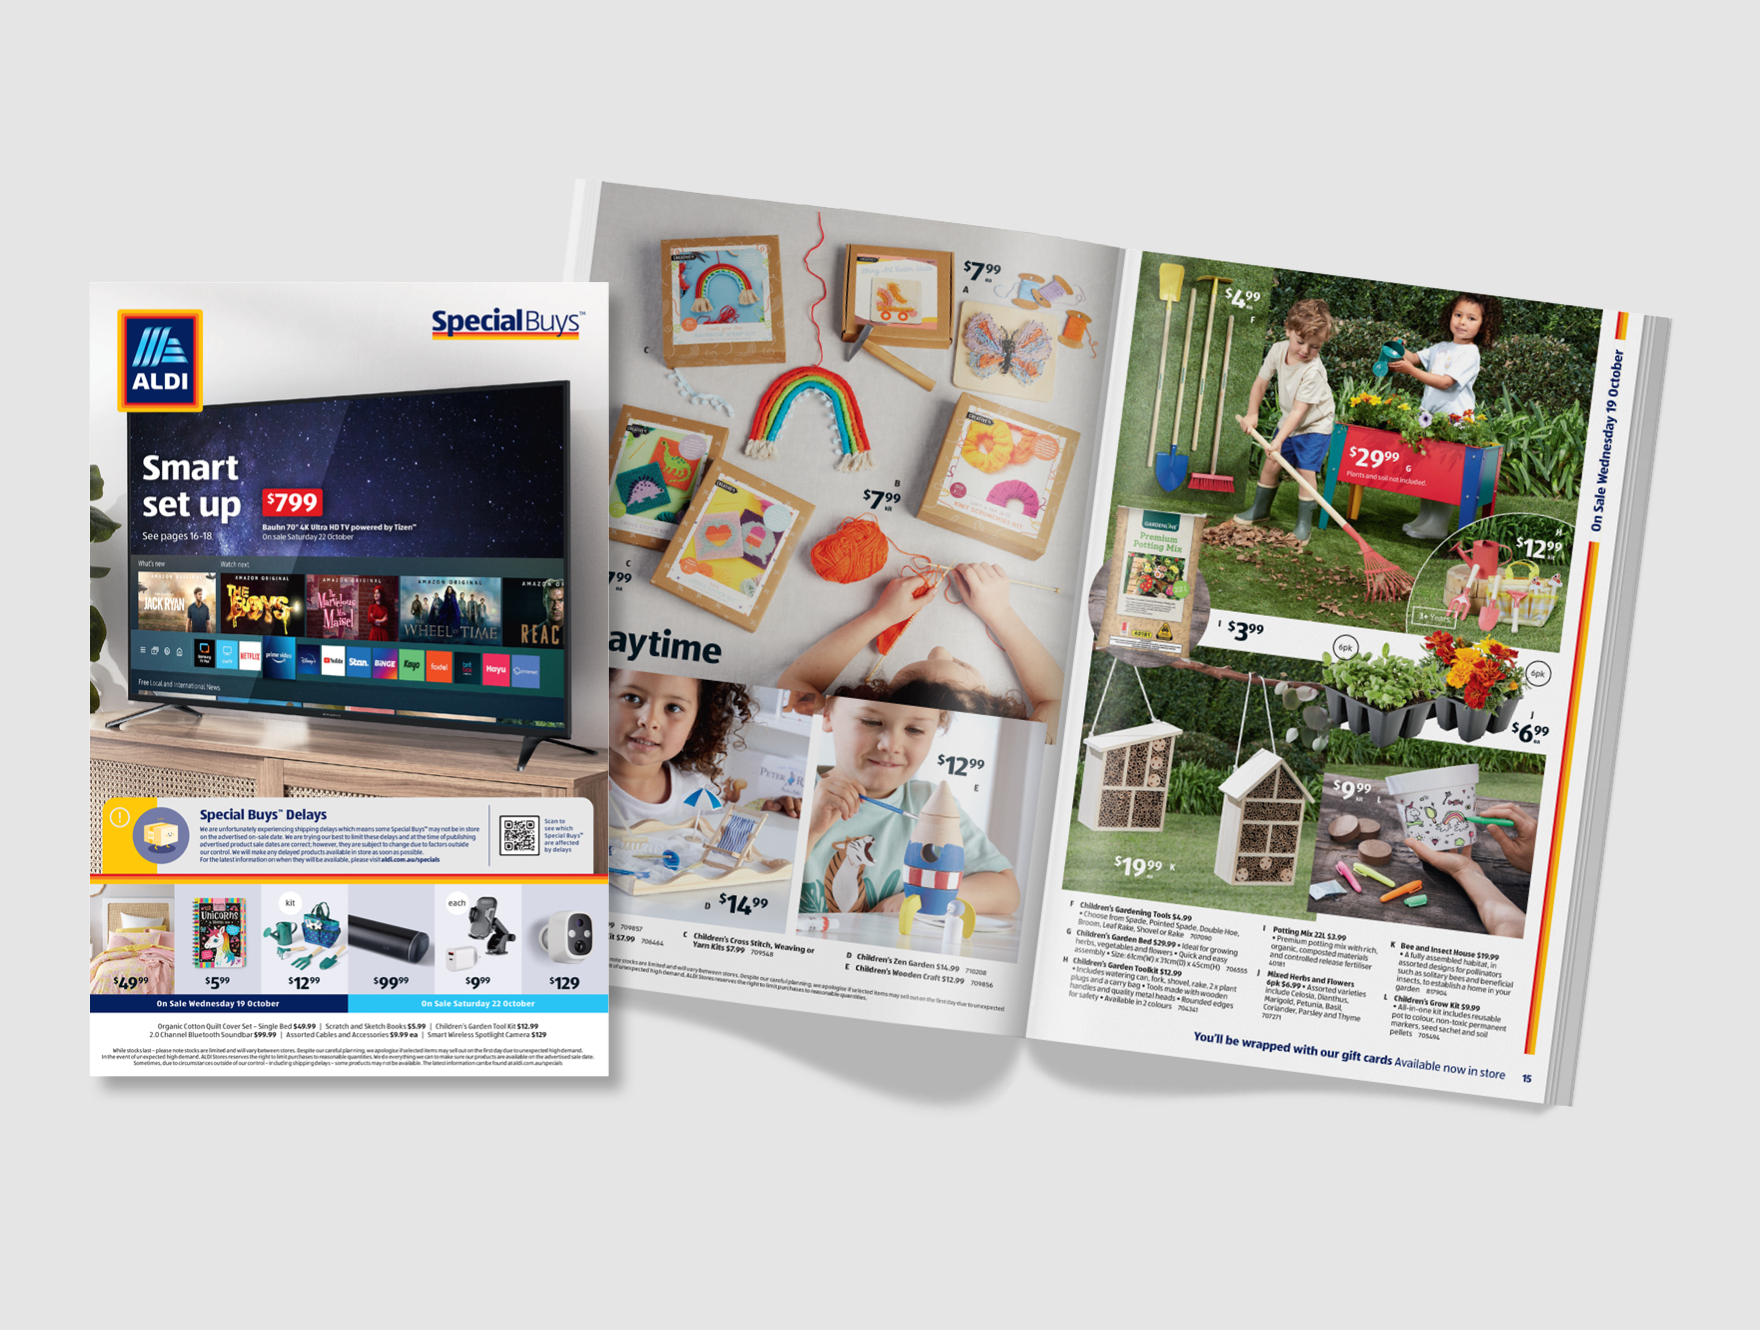 Explore the ALDI digital catalogue for this week's Special Buys.